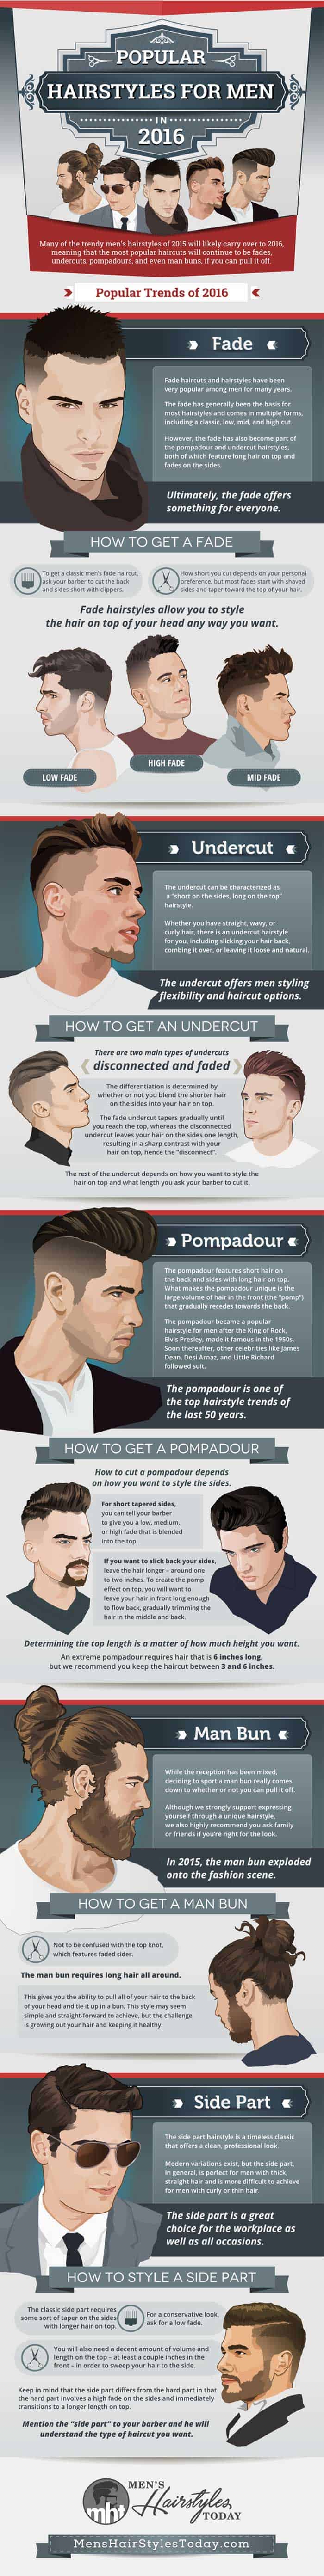 Popular Men's Hairstyles You Have to Try [Infographic] 1